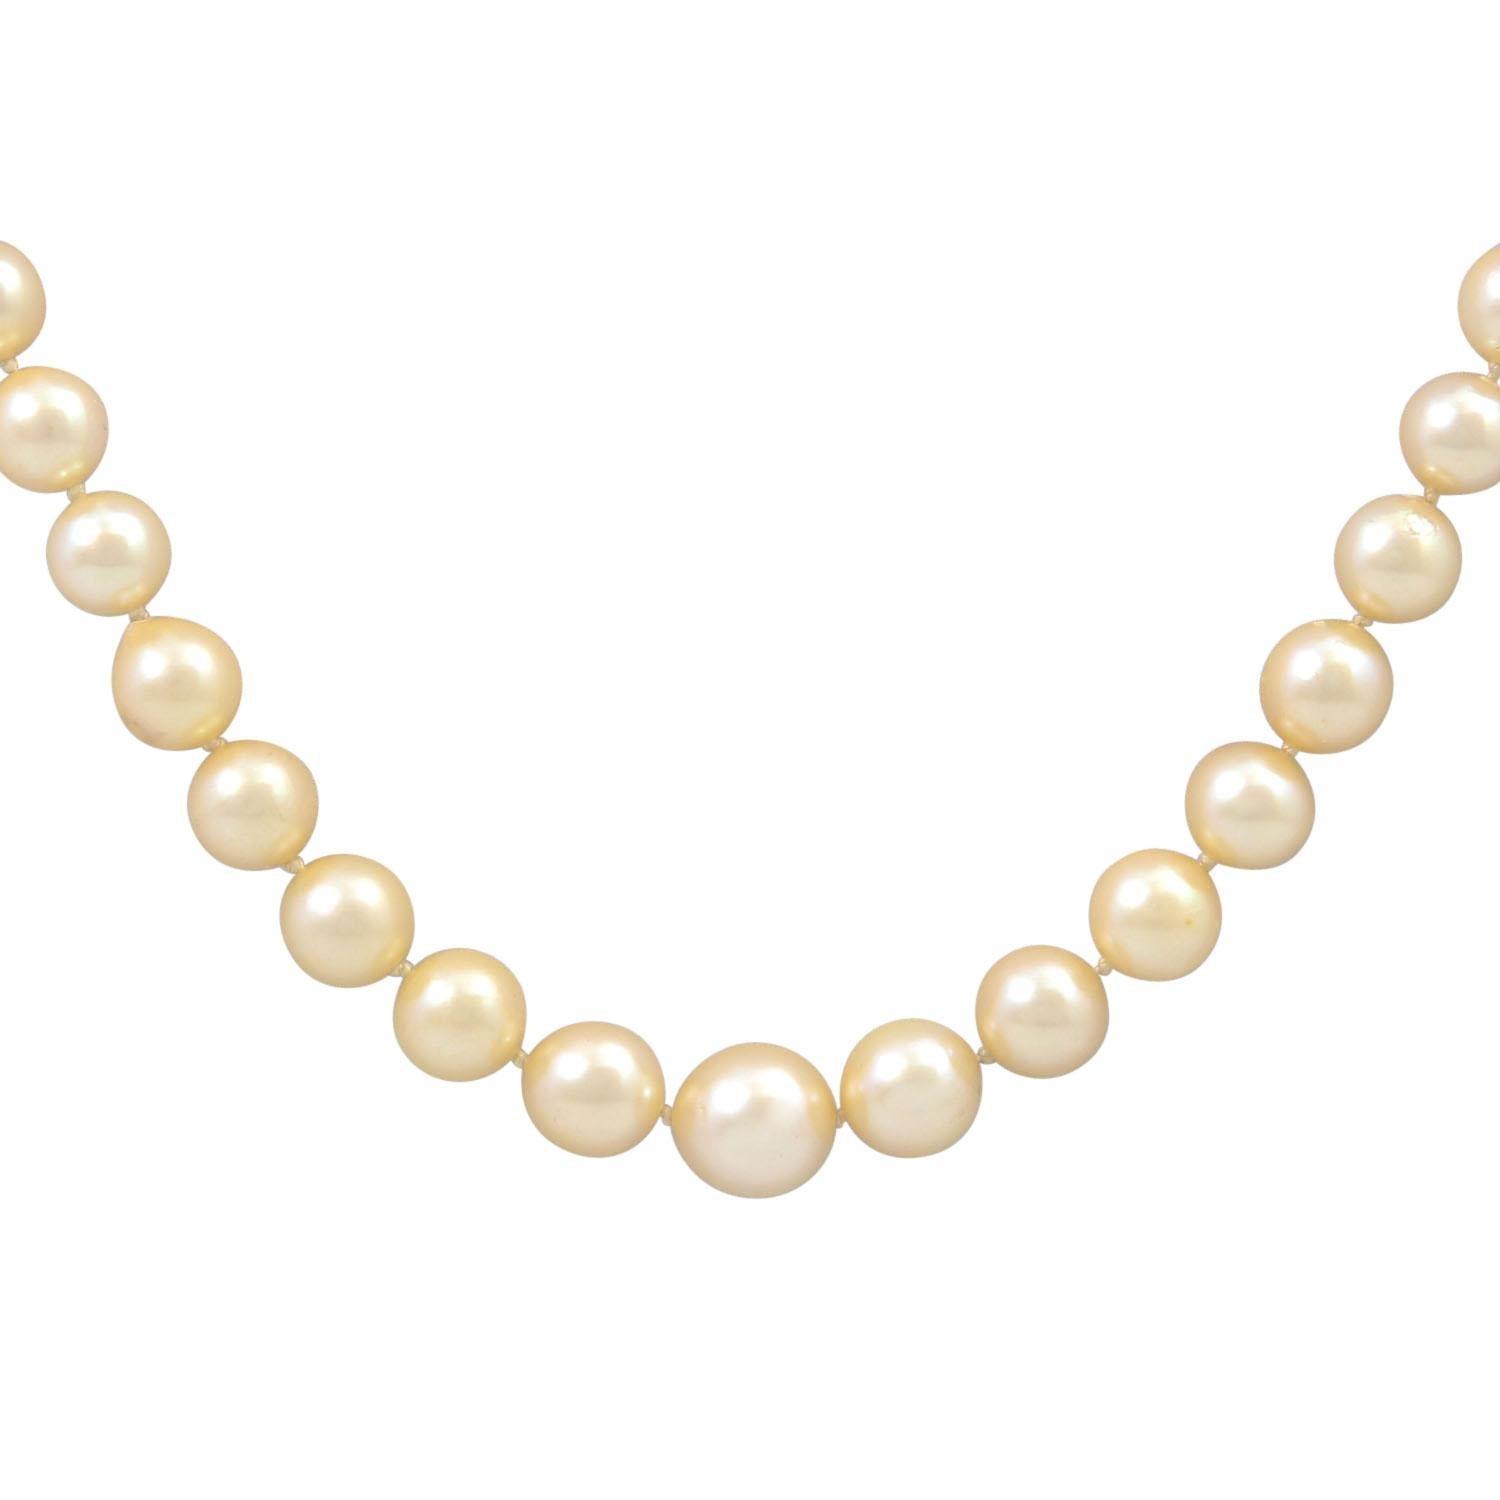 made of Akoya cultured pearls ranging in size from 5.4 to 8.6 mm, L: 54 cm, 18K gold clasp with 3 cultured pearls and safety chain, mid 20th century, slight signs of wear. (18)

 Necklace made of Akoya cultured pearls graduating from 5.4 to 8.6 mm,